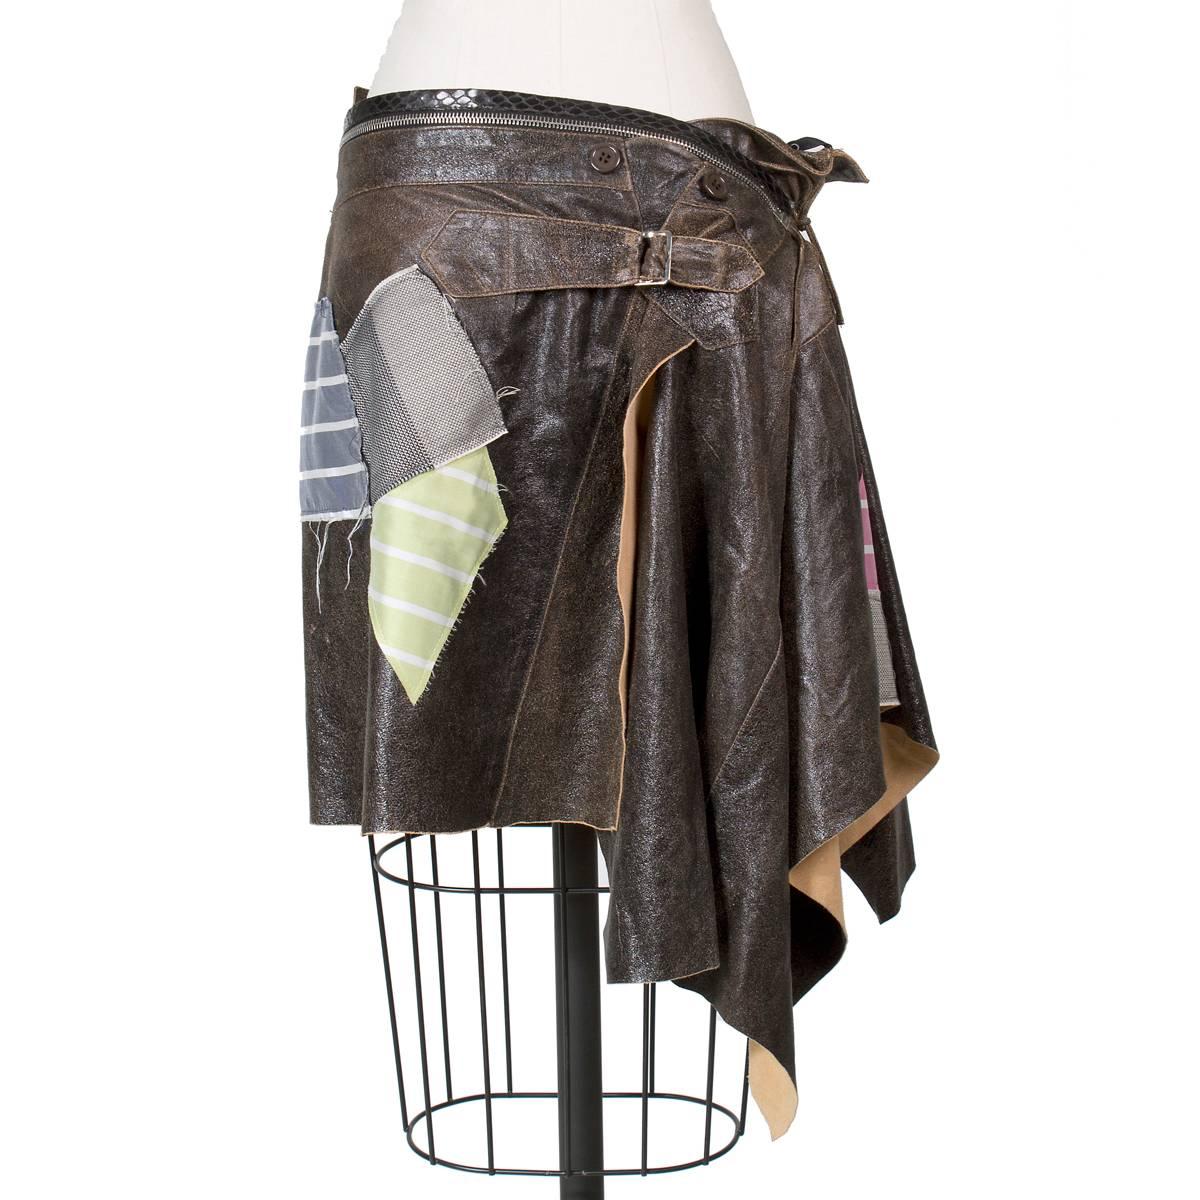 This is a skirt by John Galliano for Christian Dior circa early 2000s.  It features brown leather with a sheen and multiple sewn on patches.  There is a zipper around the waist and leather string ties on the side.